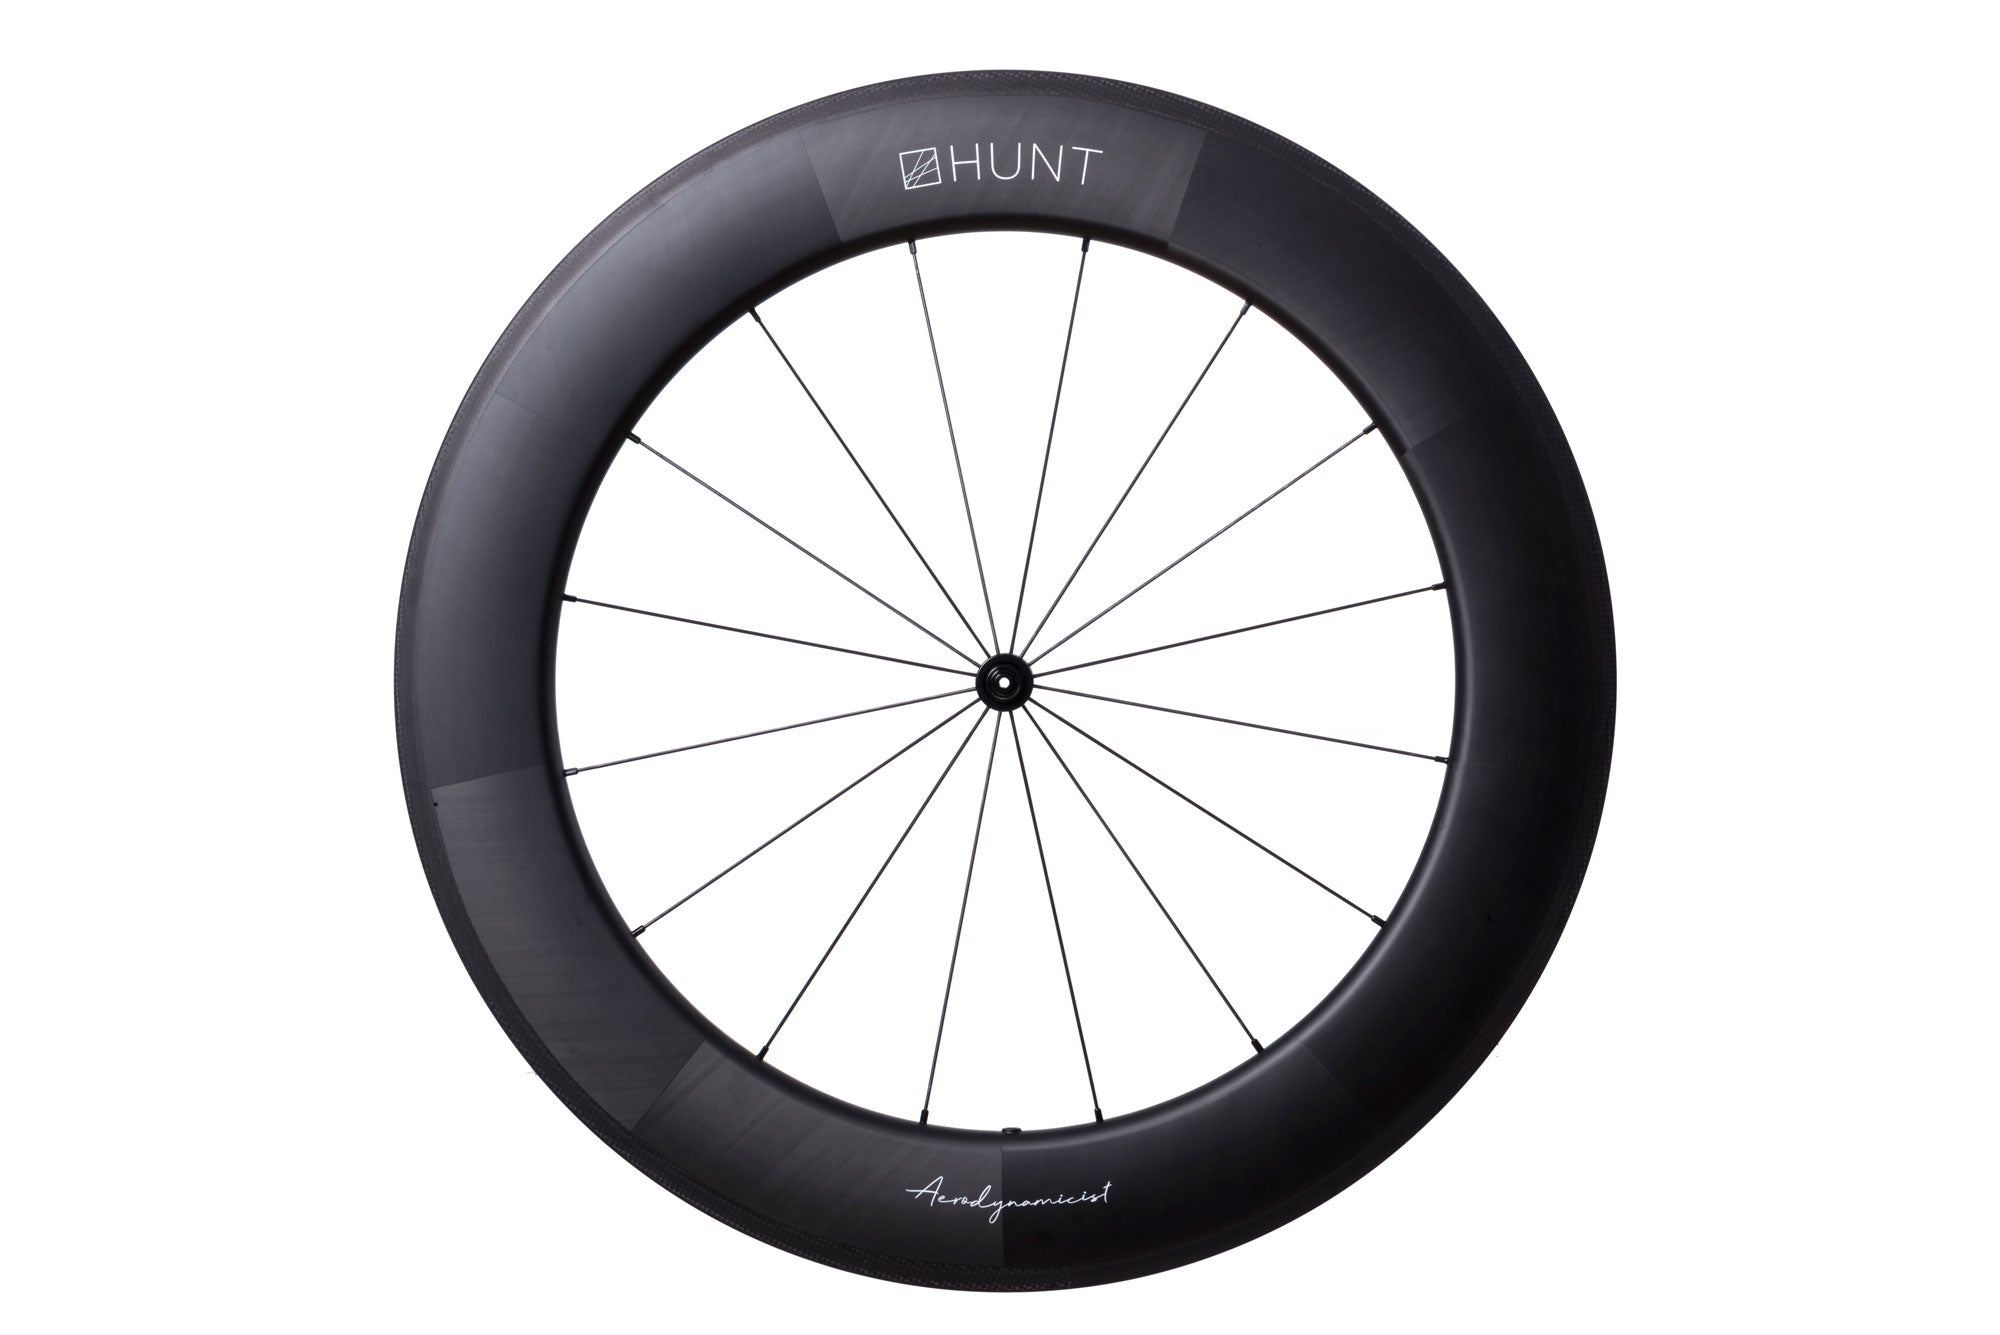 <h1>AERODYNAMICIST PROFILE</h1><i>Designed around a 19mm internal rim width optimised for a 25c tire (but will of course work without compromise with both 23c and 28c tires). Naturally, as with all of our rims, they feature a hooked tire retention design for safety, and are both fully ETRTO-compatible and tubeless-ready.</i>